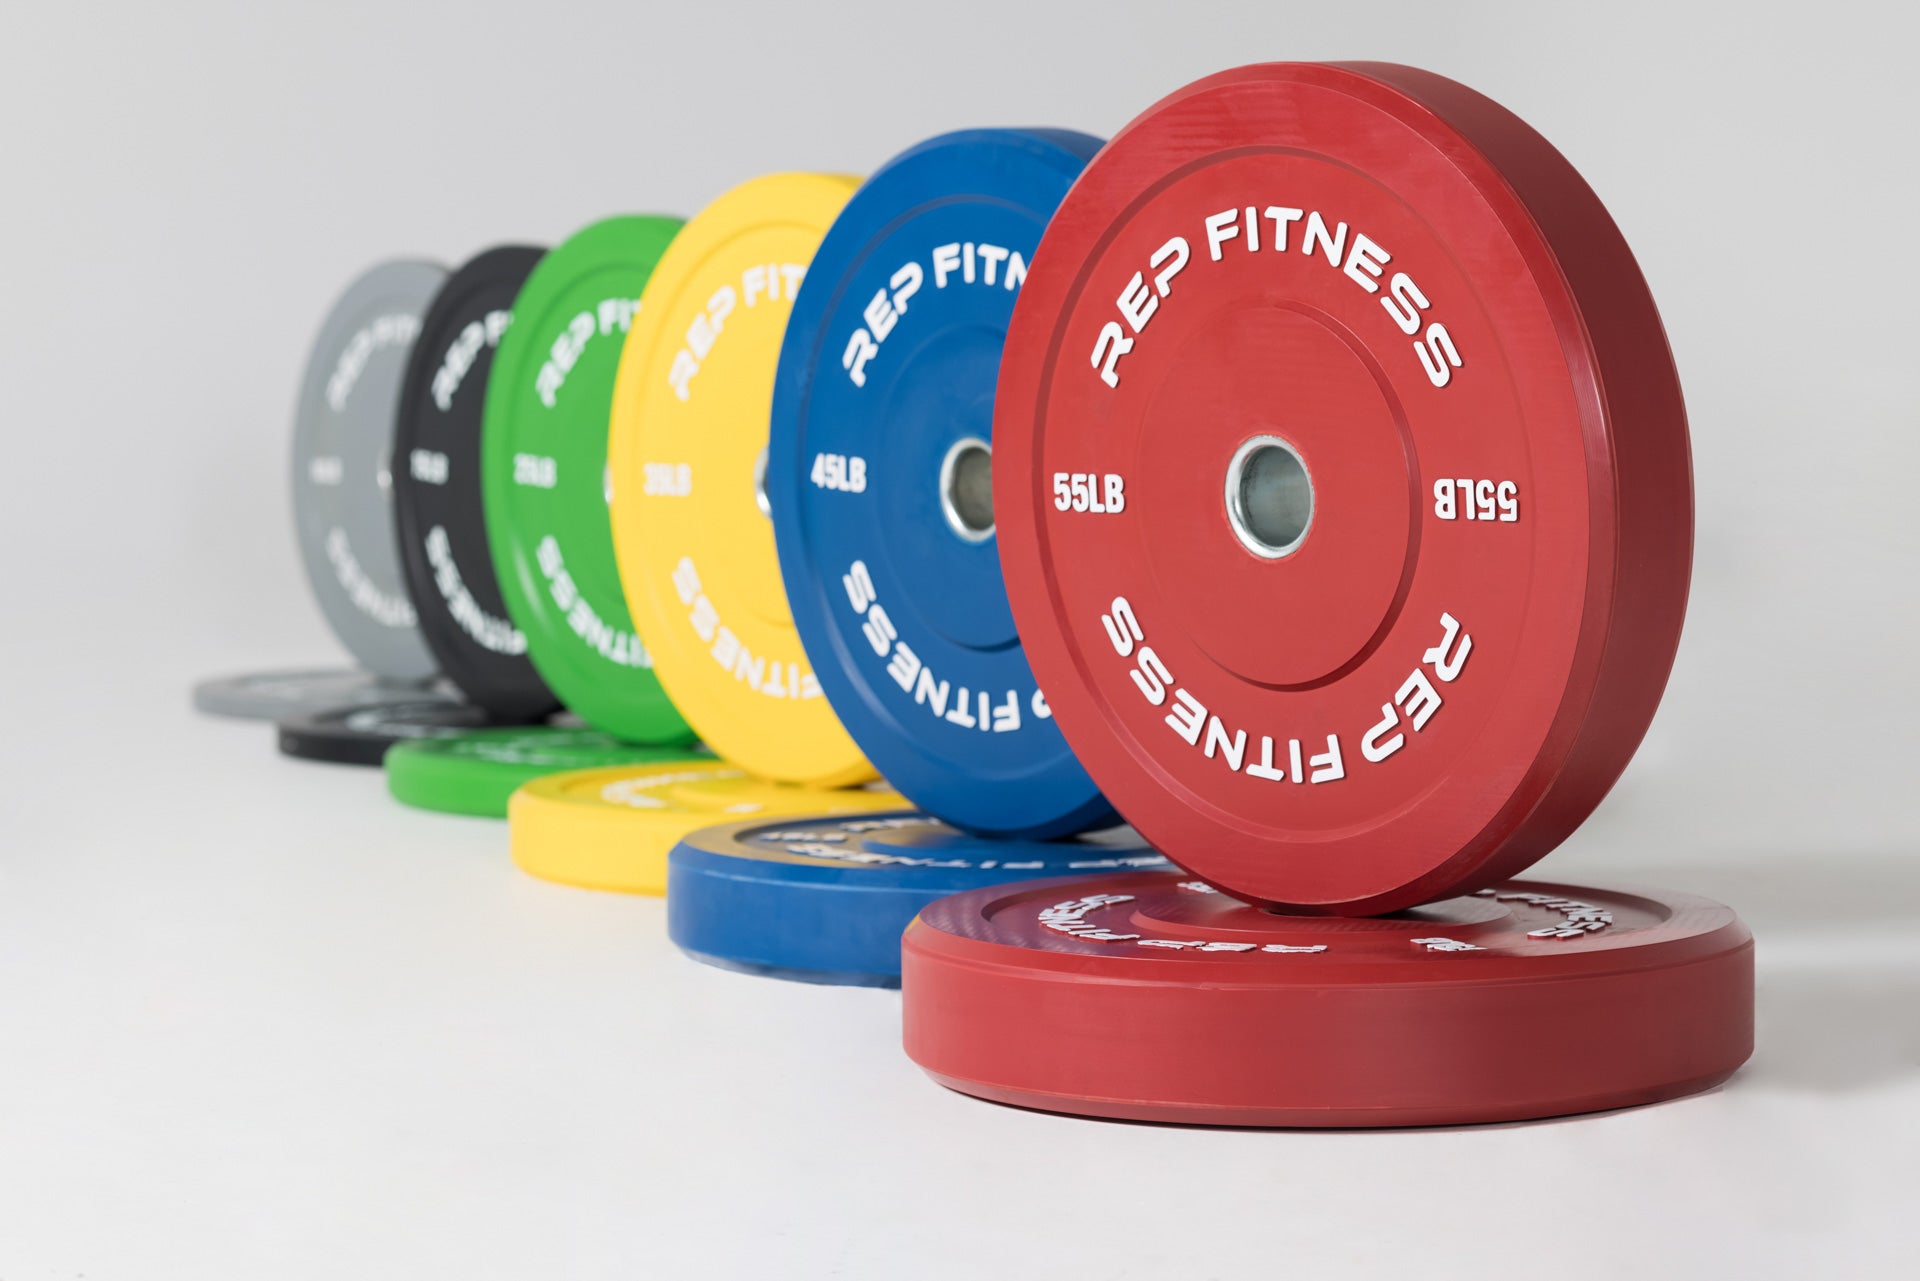 Full set of Color Bumper Plate Pairs: gray 10, black 15, green 25, yellow 35, blue 45, and red 55lb pairs.